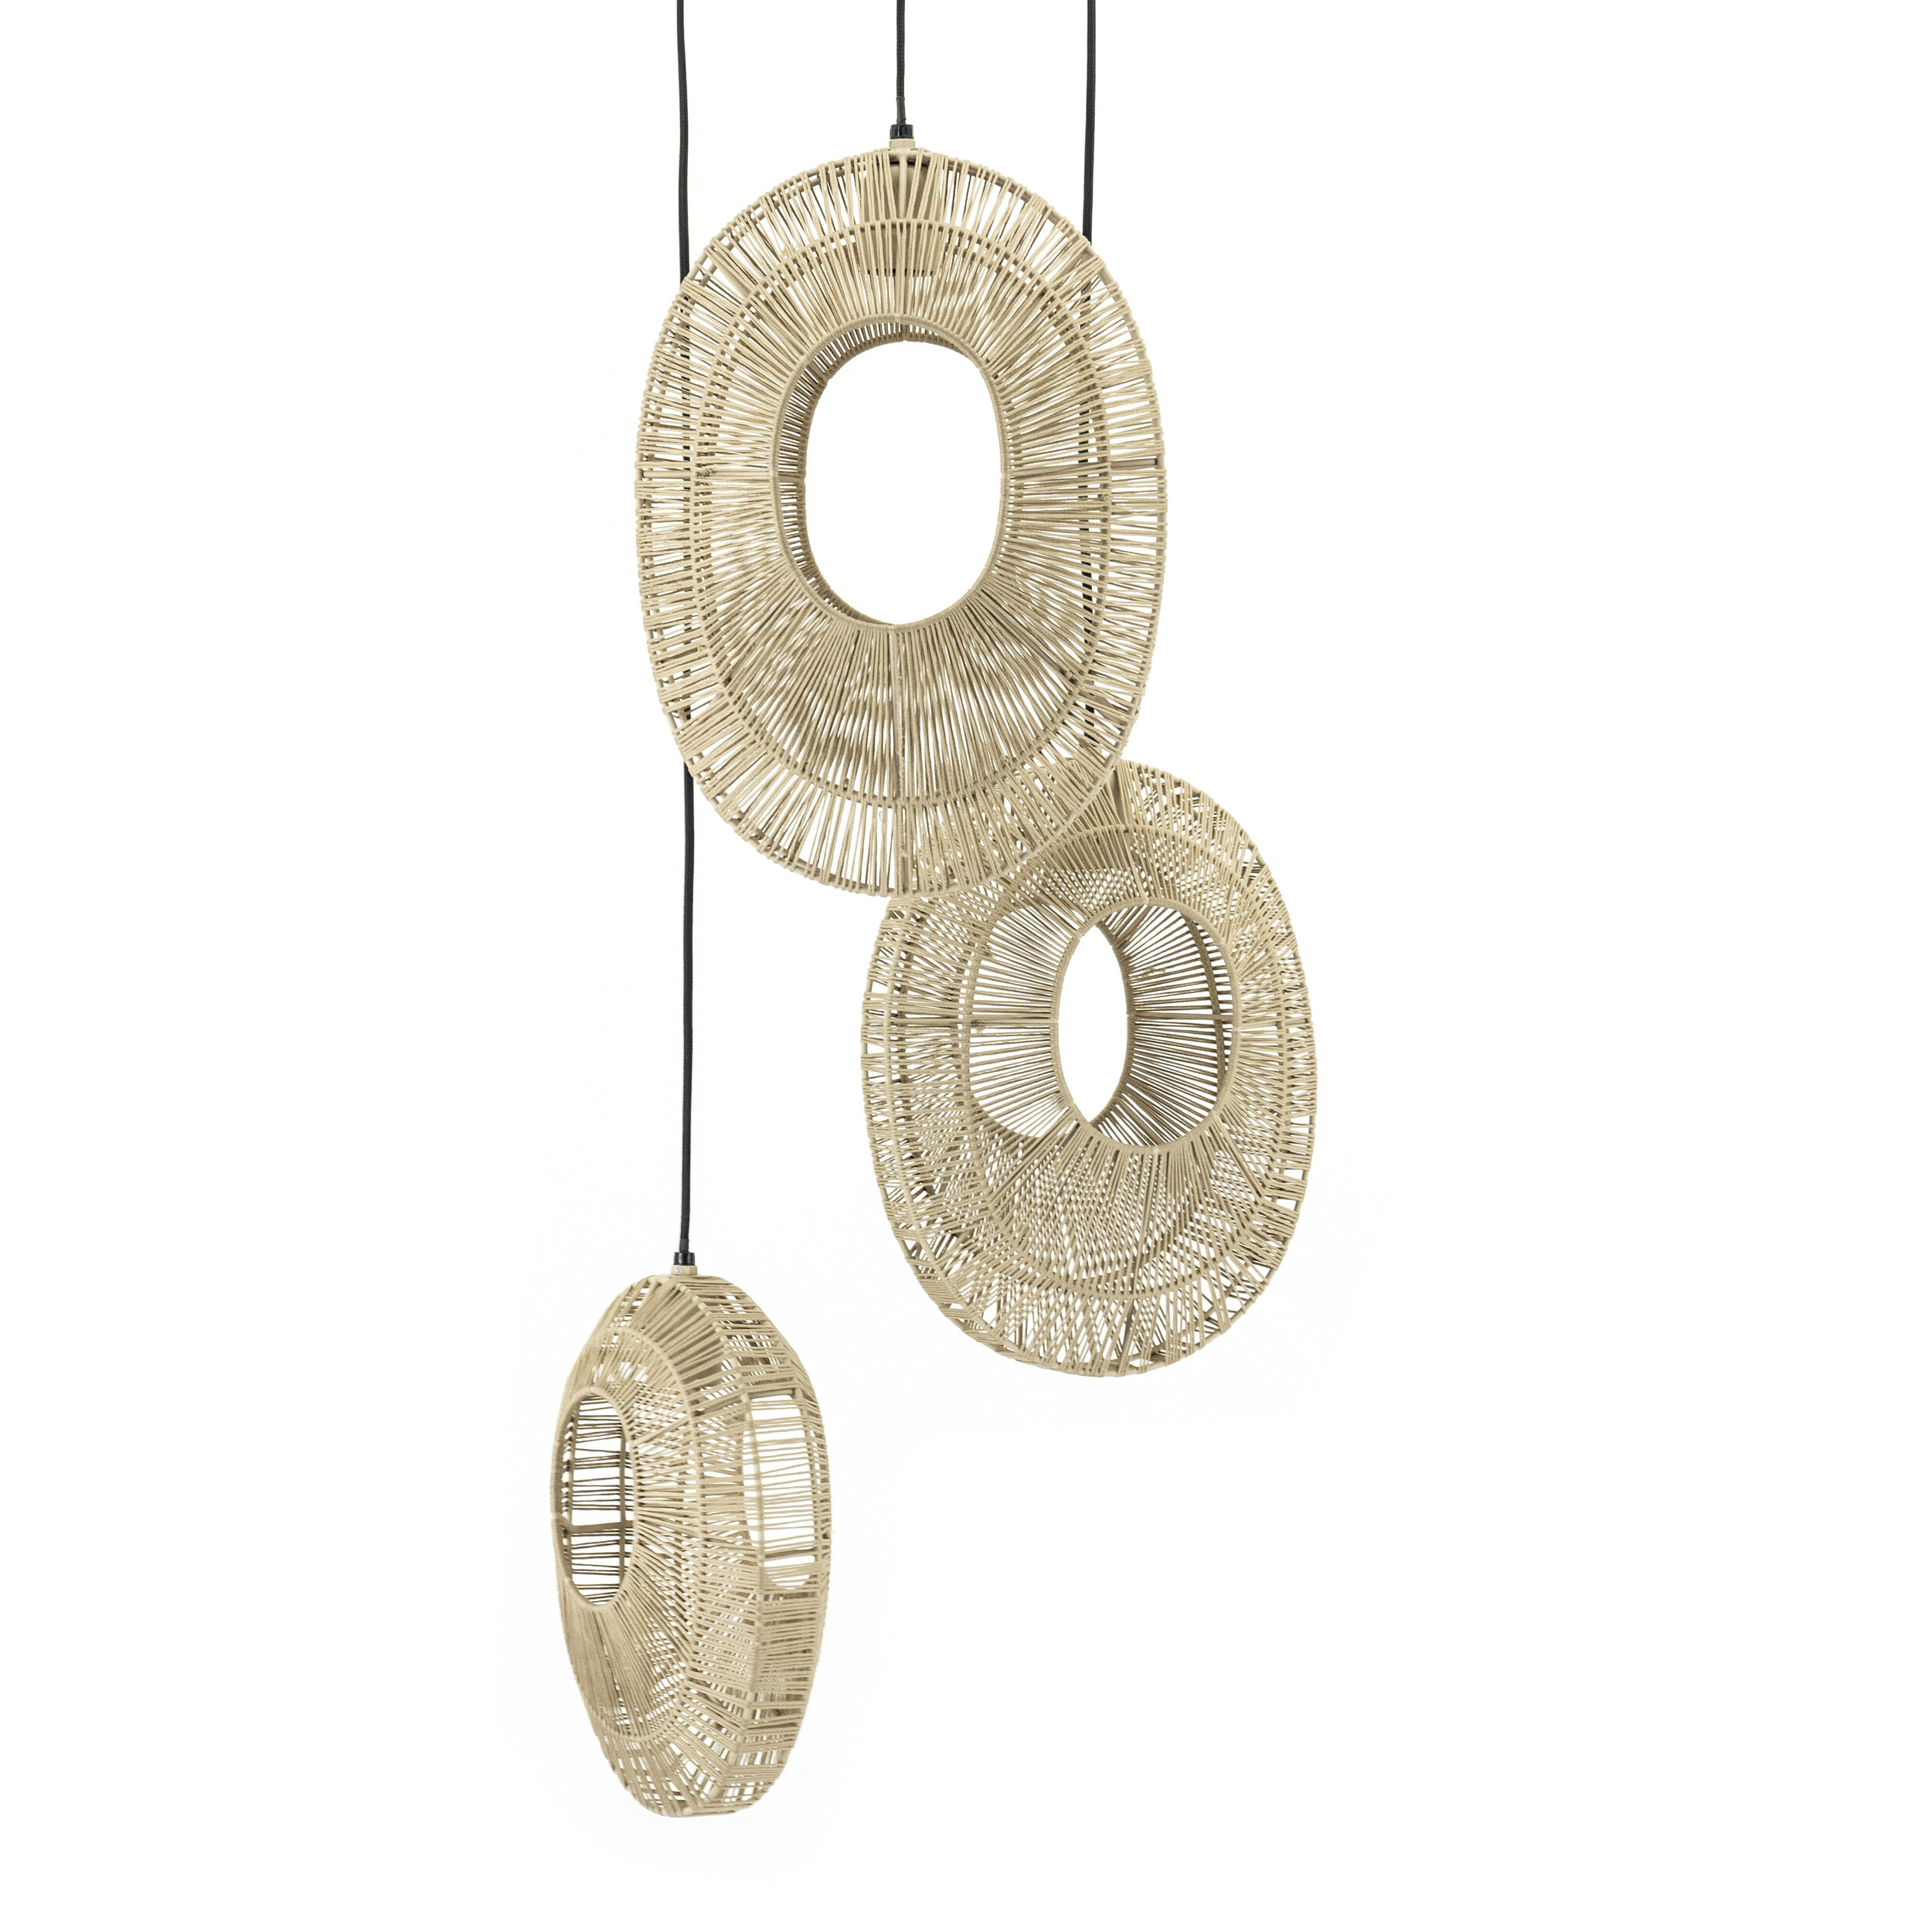 By-Boo Hanglamp Ovo 3-lamps Cluster Rond